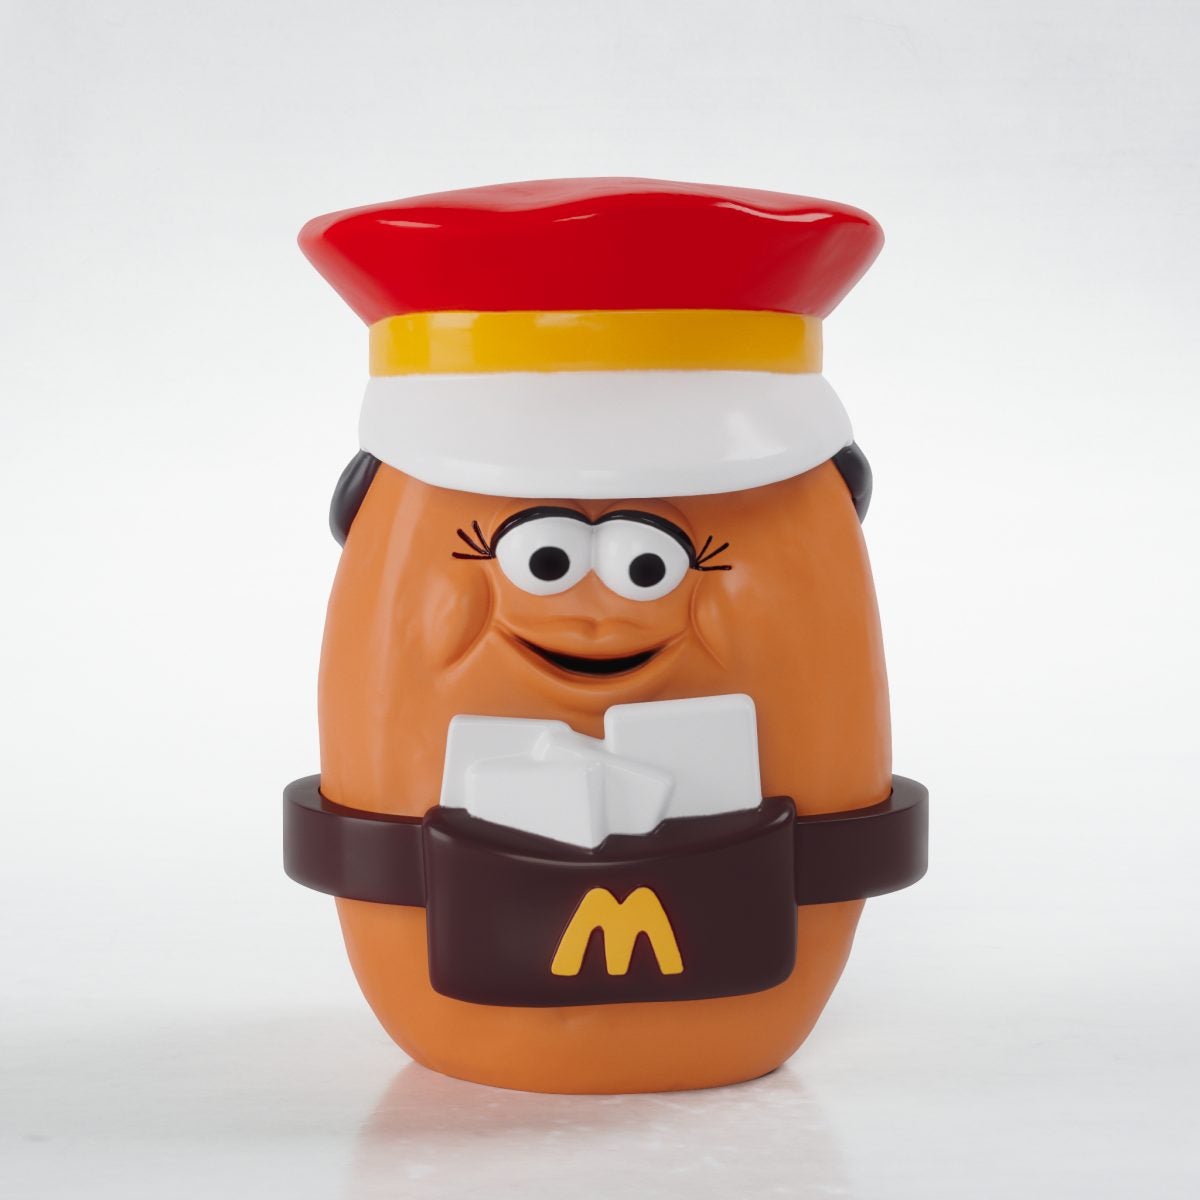 Iconic Mcdonald's Happy Meal Toys From Our Childhood Available From Nov 28 &Amp; We're Feeling Nostalgic - World Of Buzz 5